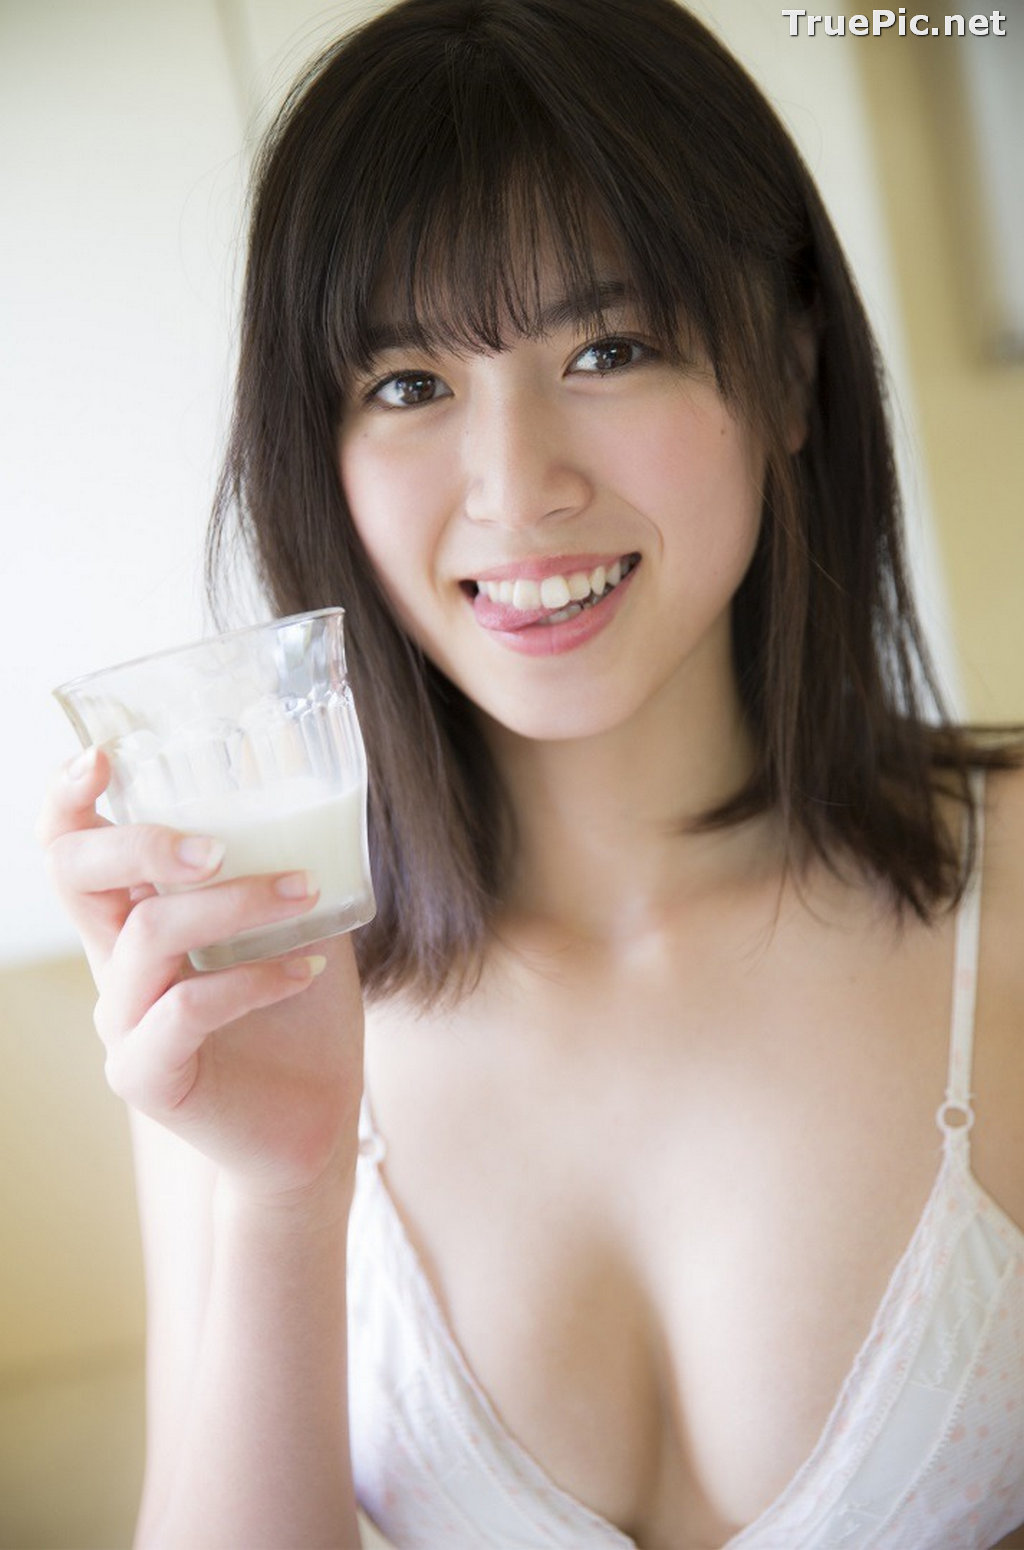 ImageJapanese Gravure Idol and Actress - Kitamuki Miyu (北向珠夕) - Sexy Picture Collection 2020 - TruePic.net - Picture-34